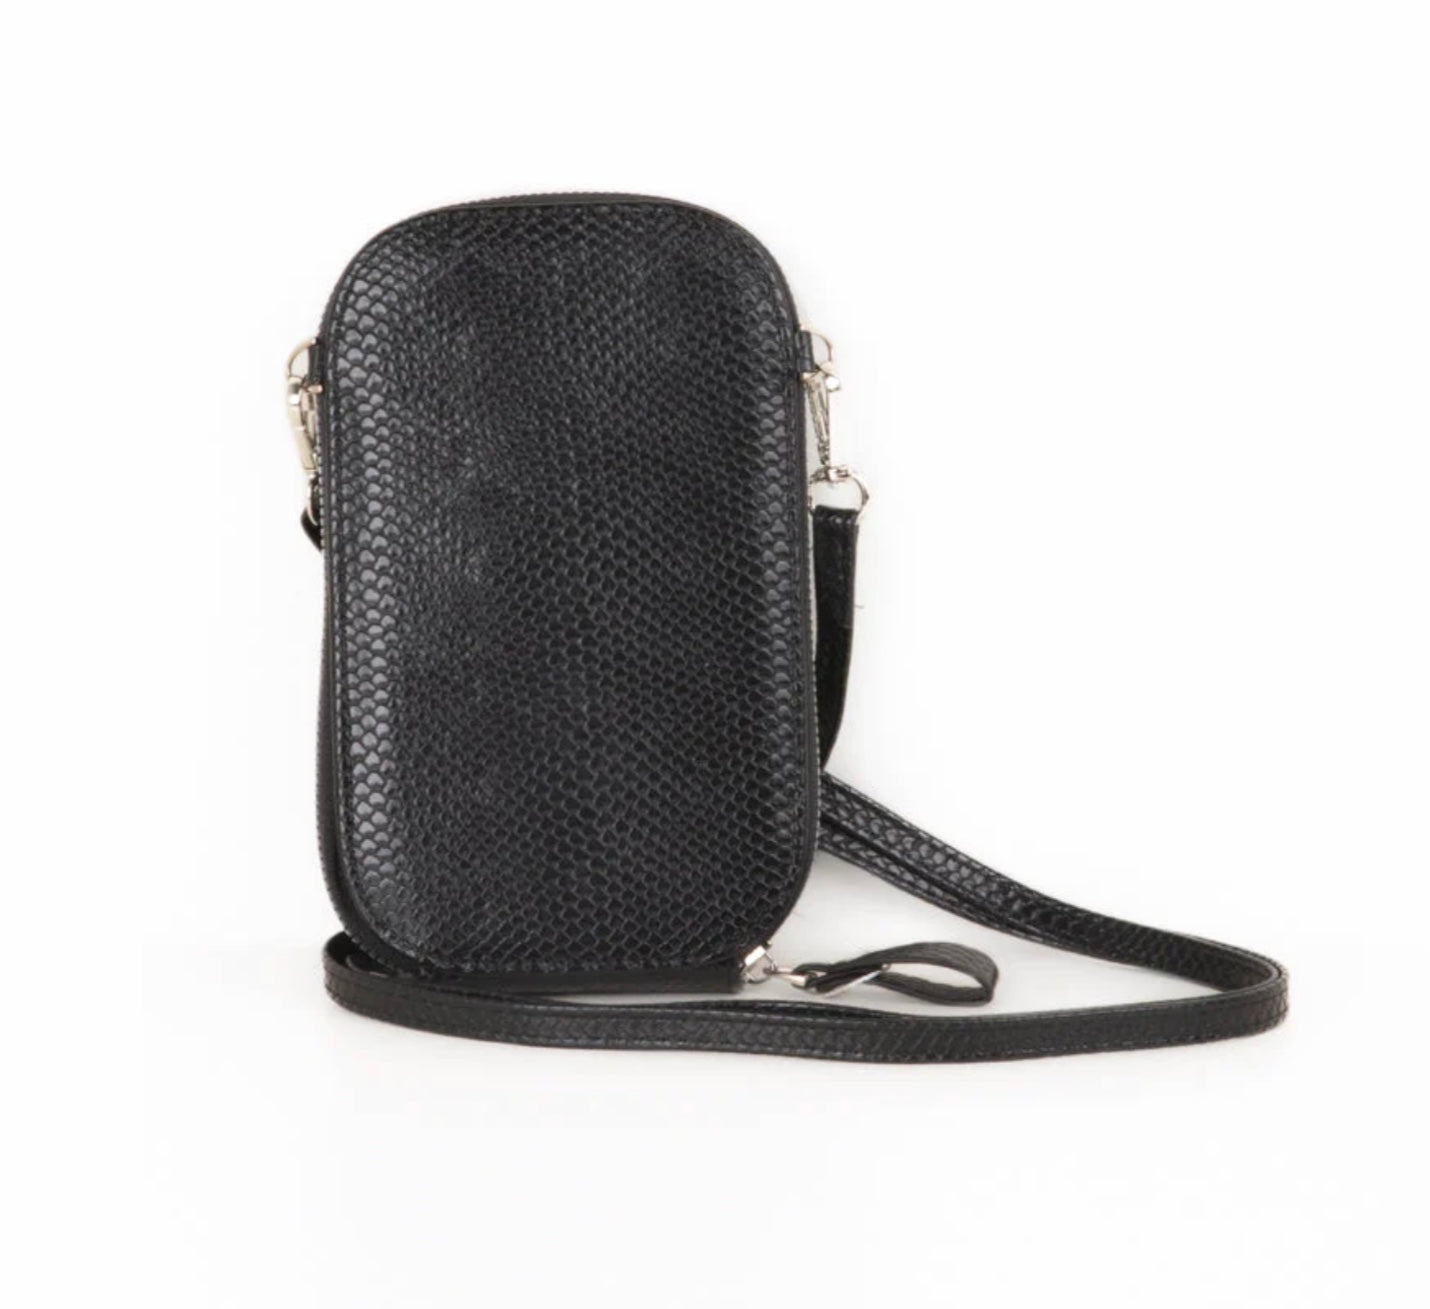 2-in-1 Wallet/Small Crossbody Bag w/ Removable Strap - Black